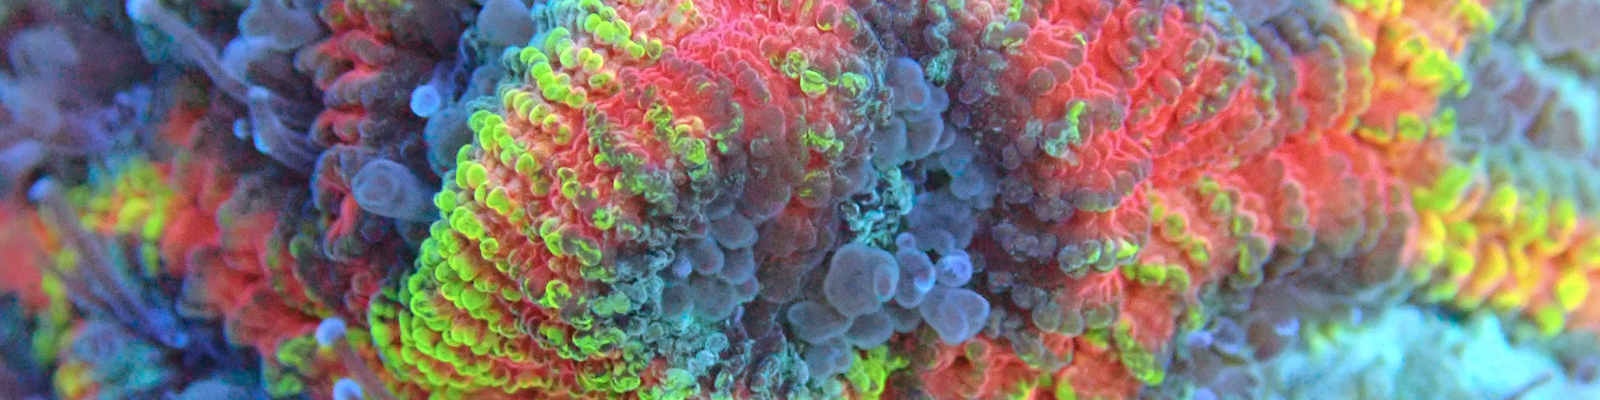 Sps Coral